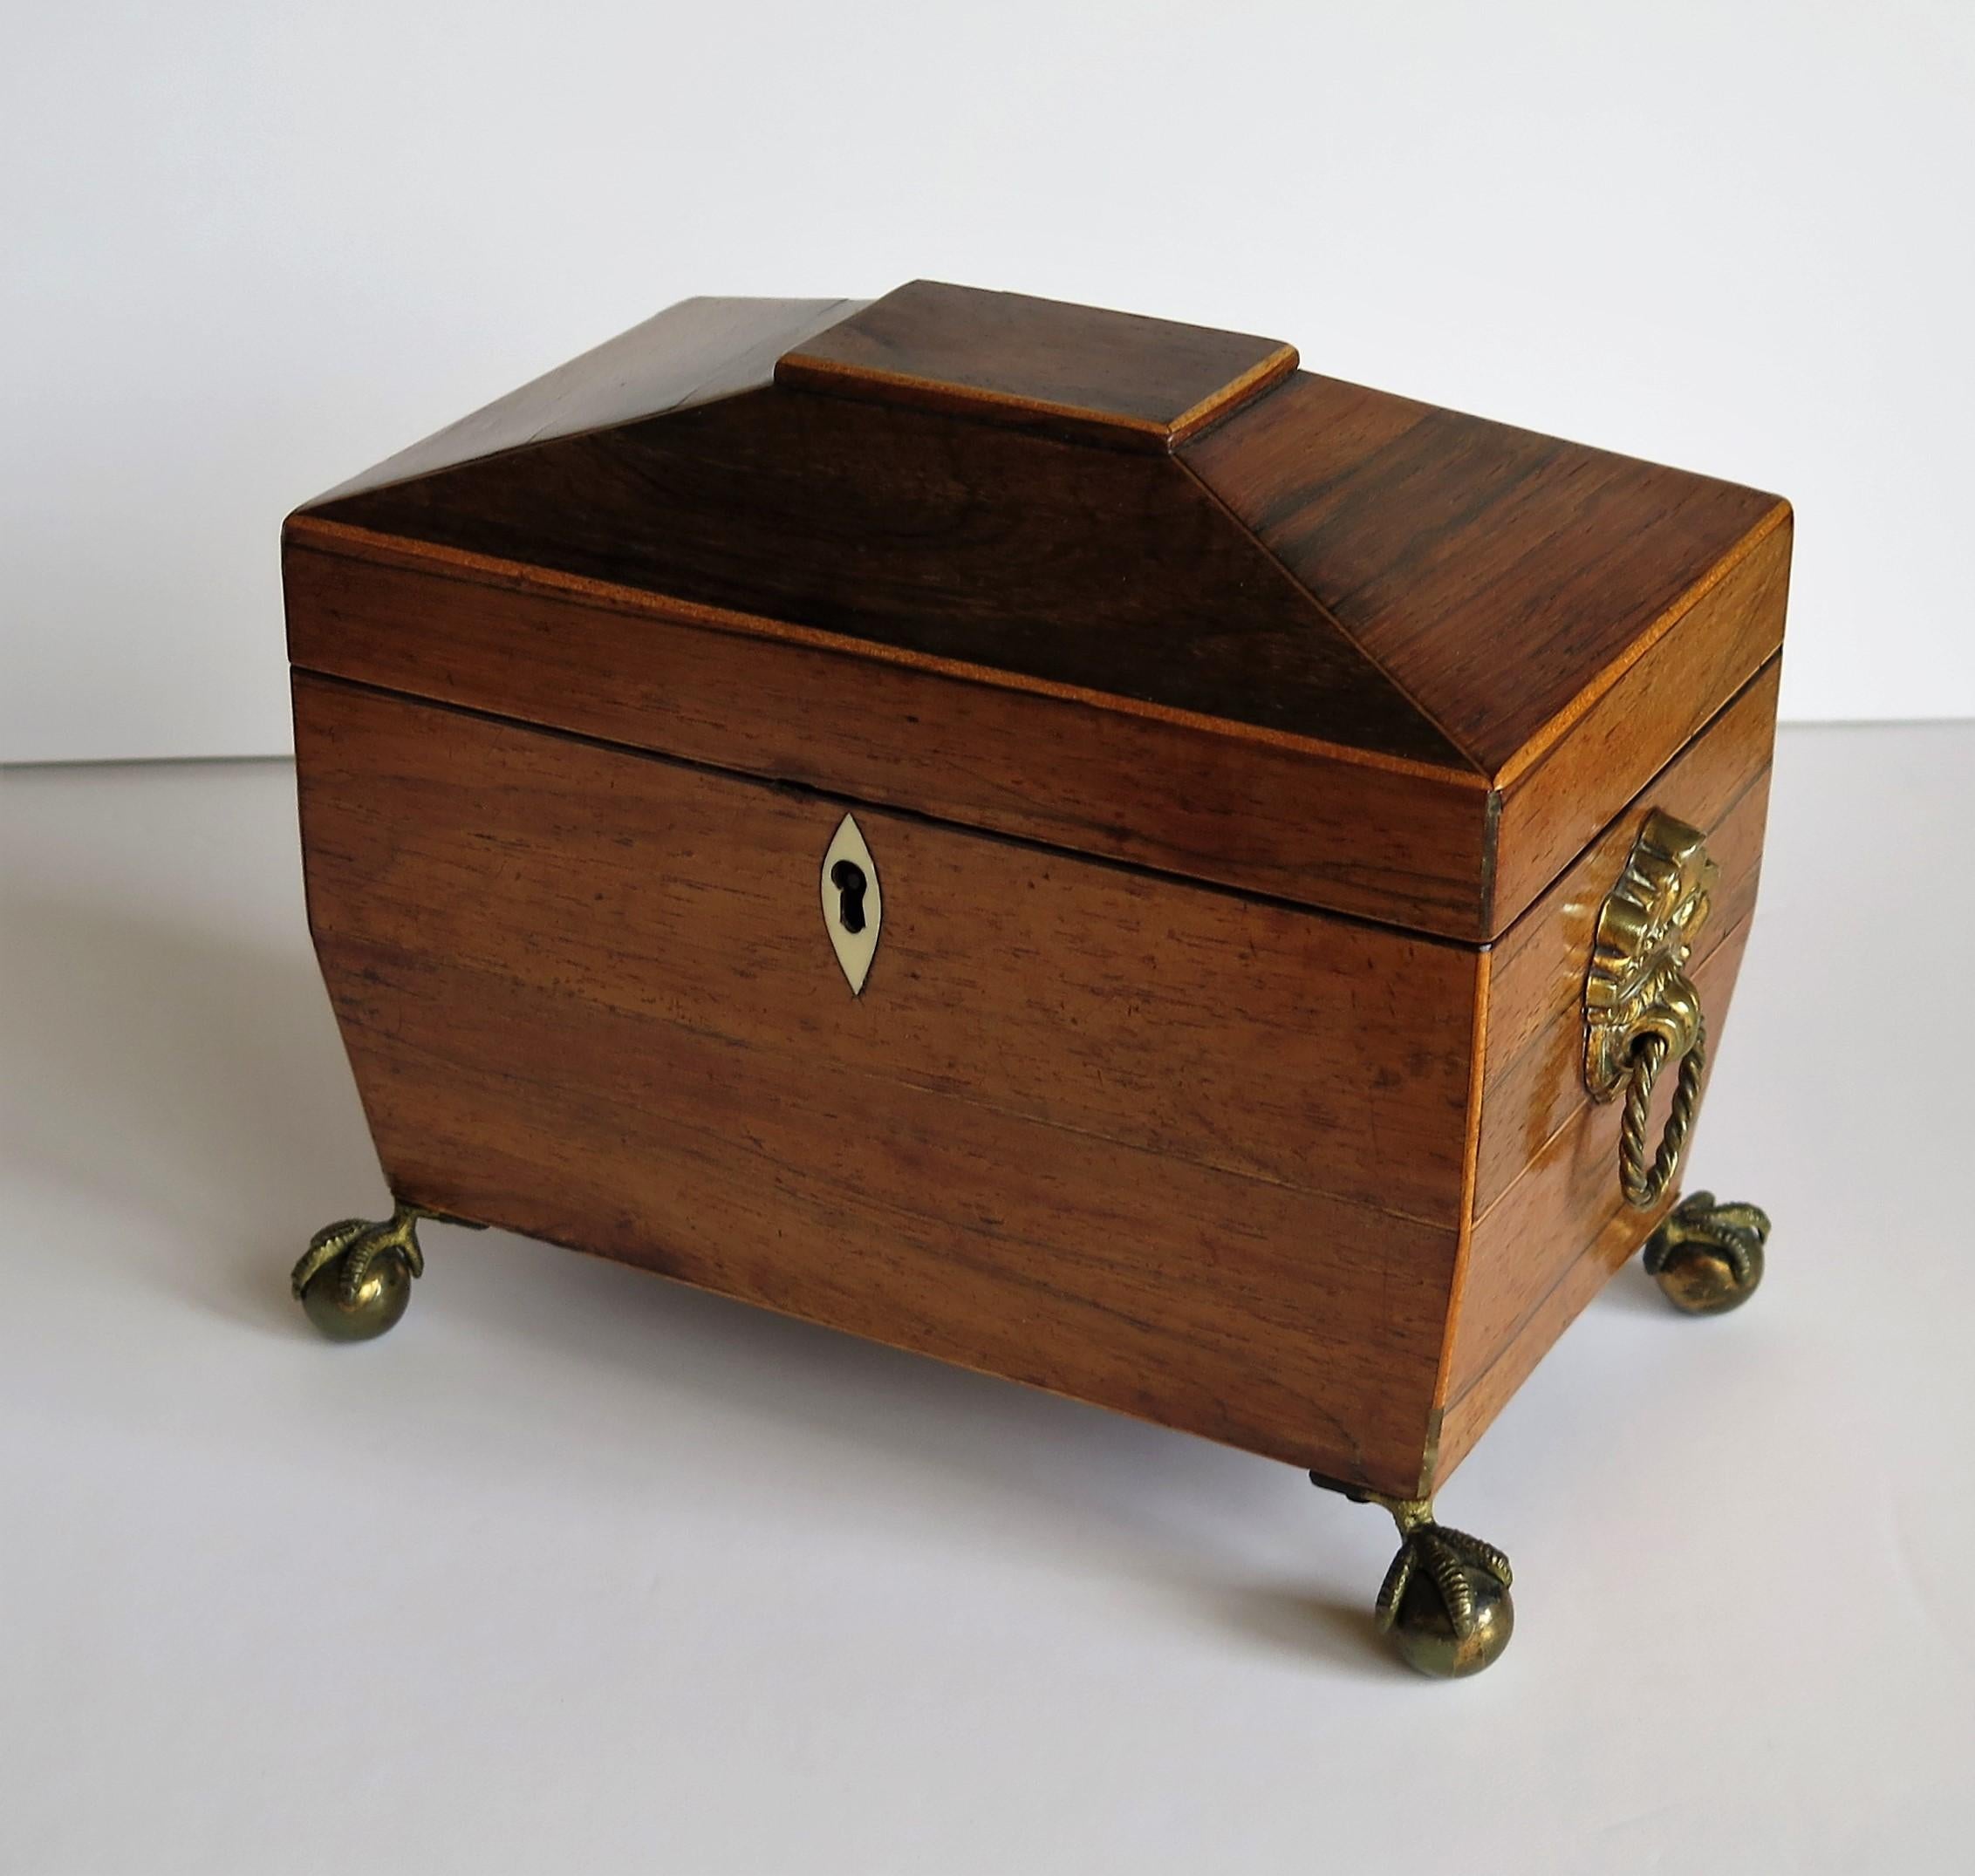 This is a good, high quality, English, Georgian period tea caddy with two lidded compartments, circa 1815.

The tea caddy has a sarcophagus shape with two lidded internal compartments.
It has been very carefully handmade of various contrasting